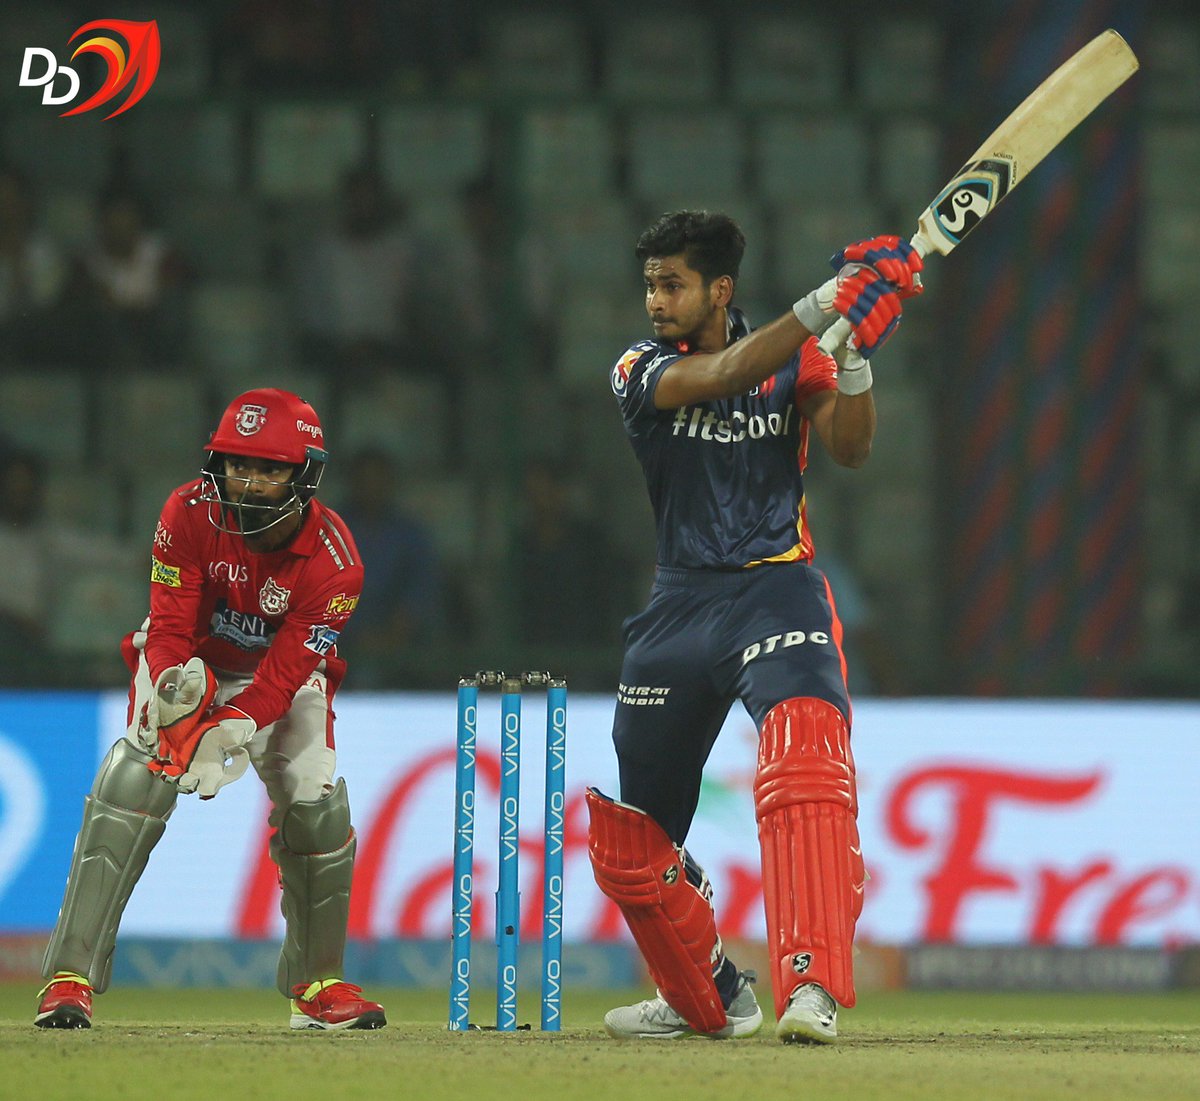 Here are some of the best snaps from a close game against the Kings XI Punjab at the Feroz Shah Kotla.

Full gallery: goo.gl/fN63jq

#DilDilli #Dhadkega #DDvKXIP